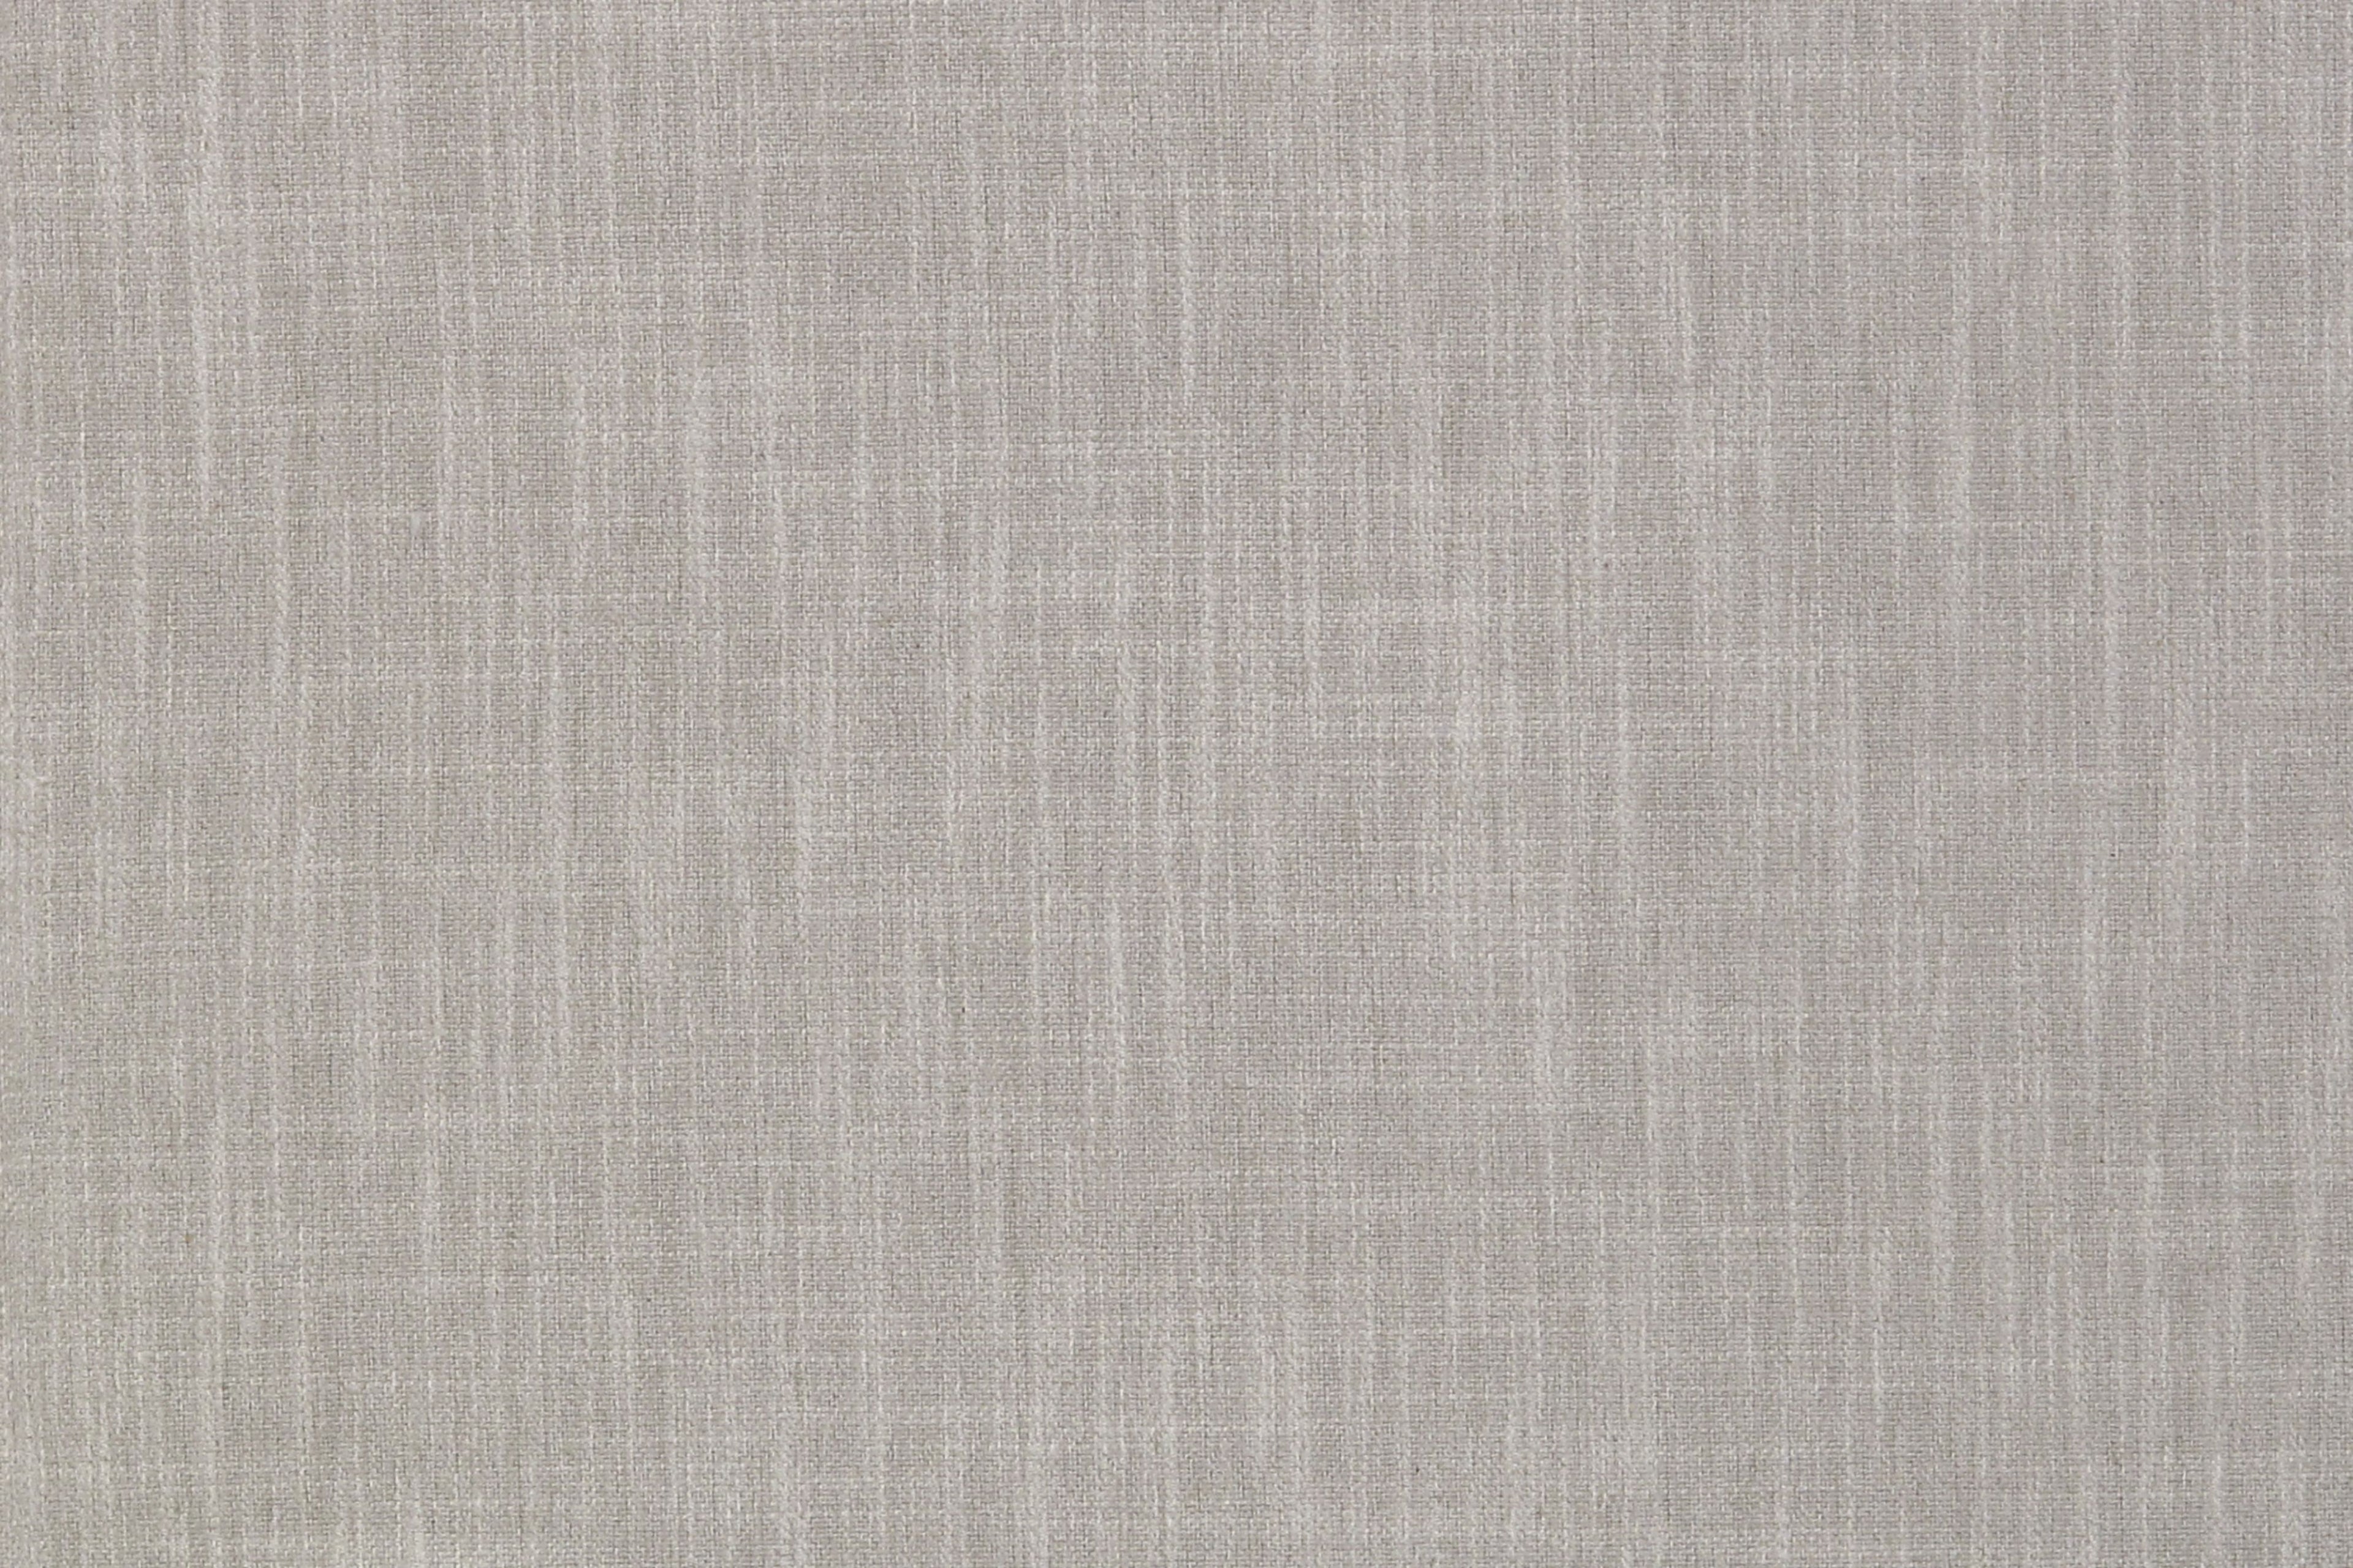 Flax fabric in concrete color - pattern number H6 0010FLAX - by Scalamandre in the Old World Weavers collection